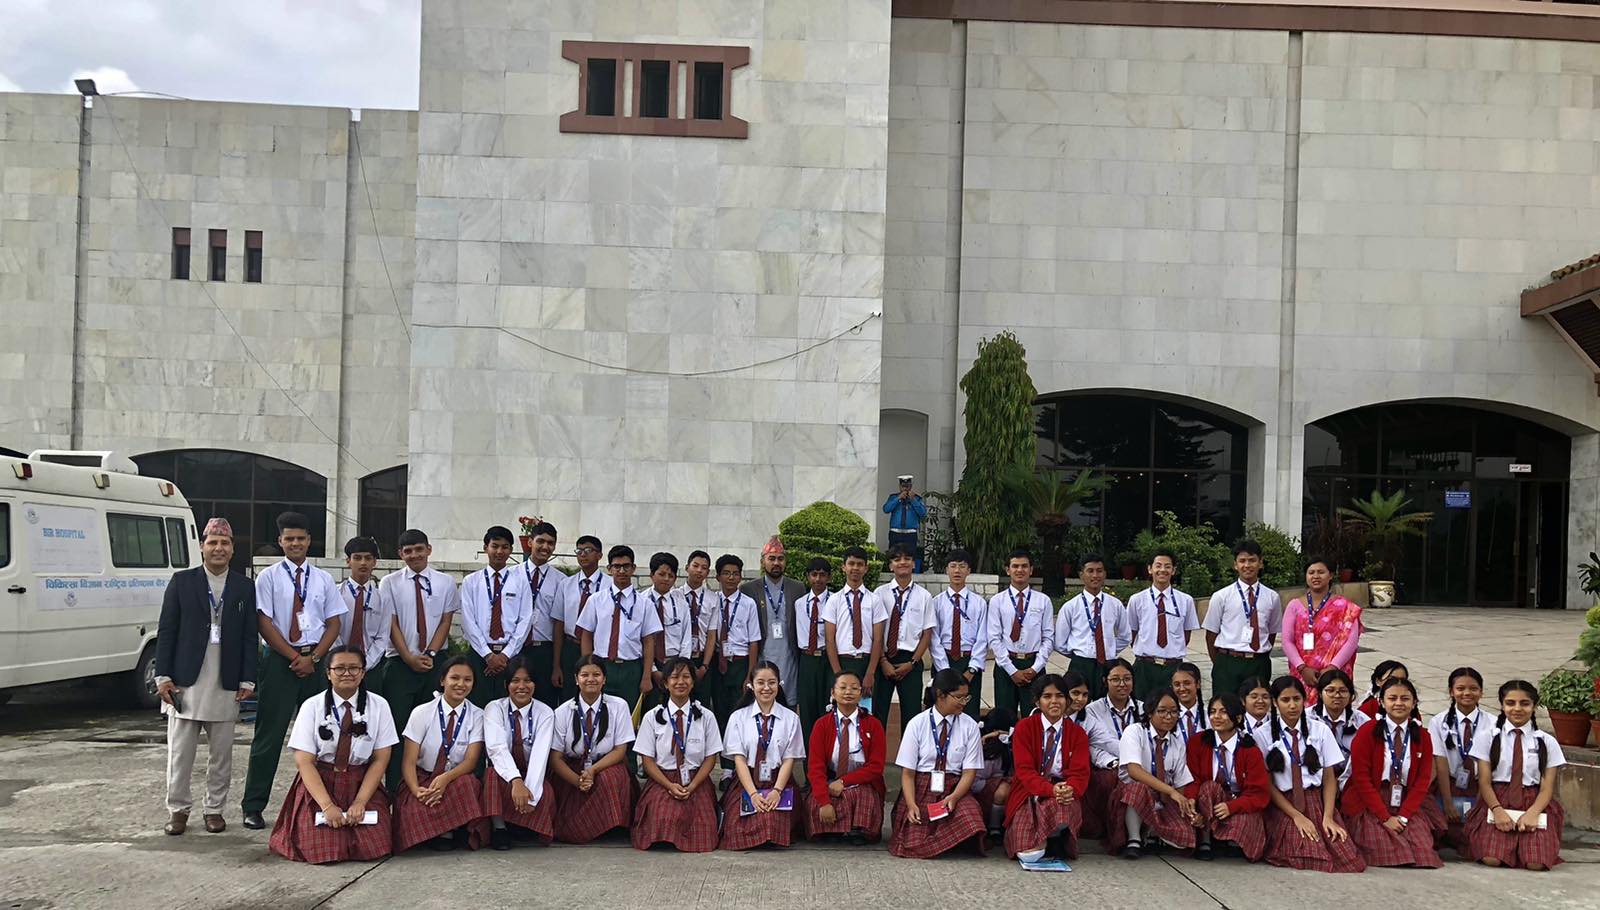 Students of Euro School in Chauni Broaden Learning Horizons with On-Site Visit to Pratinidhi Sabha